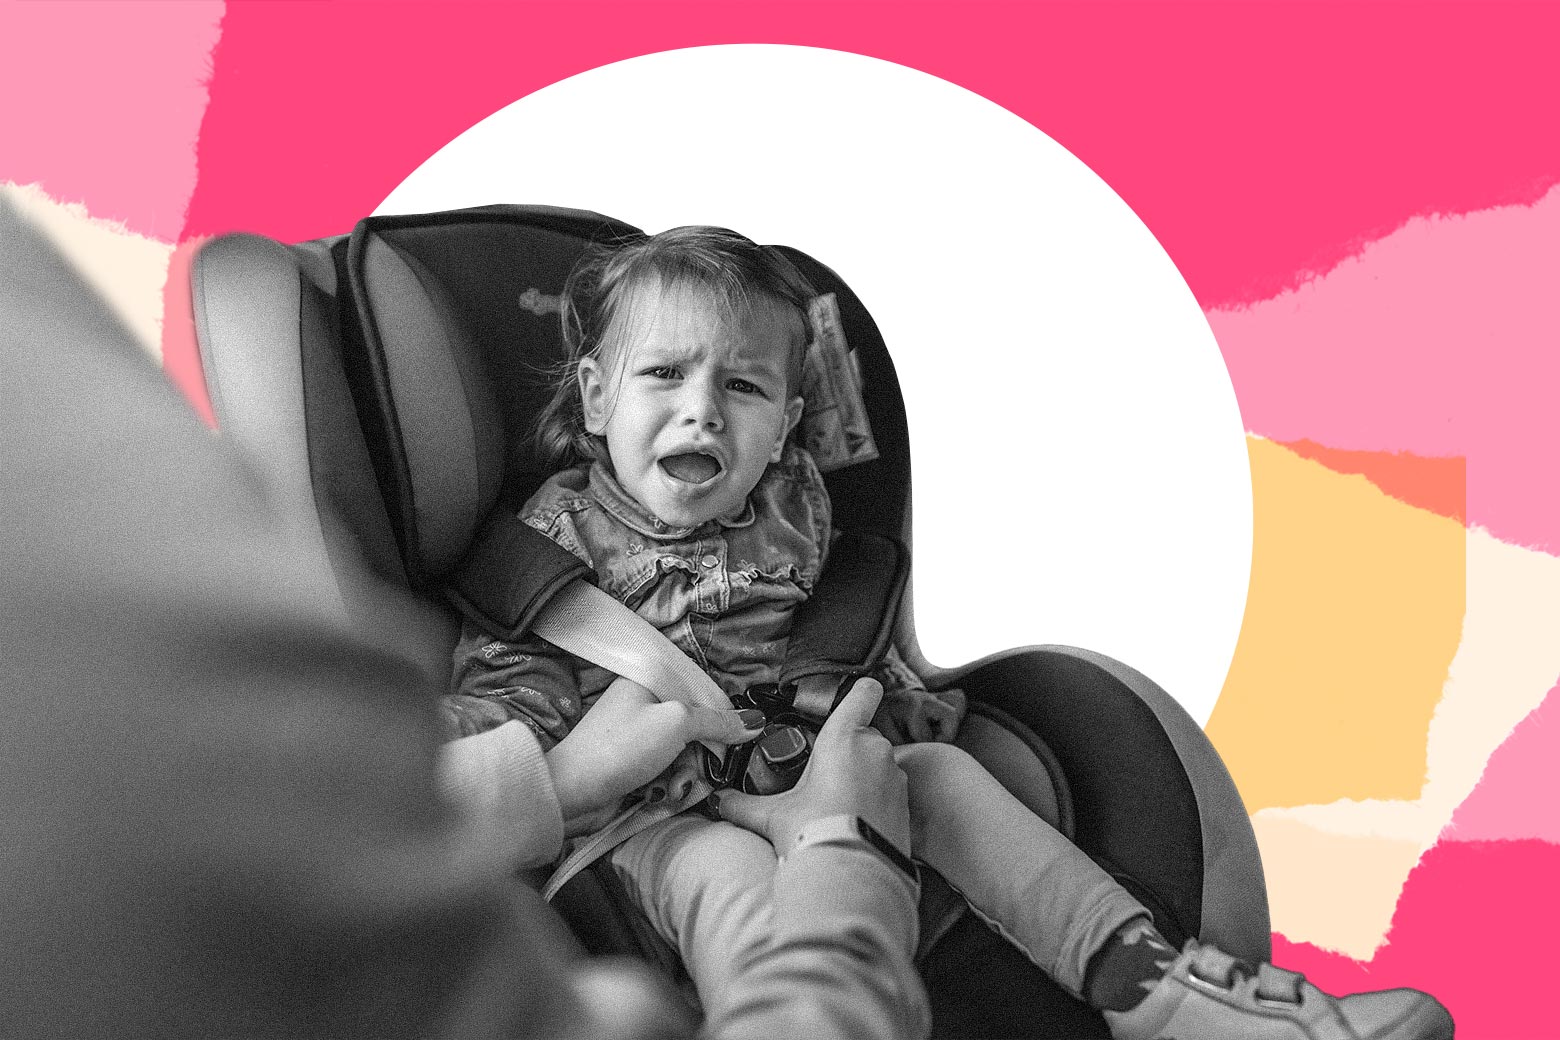 We Thought Our Daughter Would Get Used to Her Car Seat. We Were So Wrong.